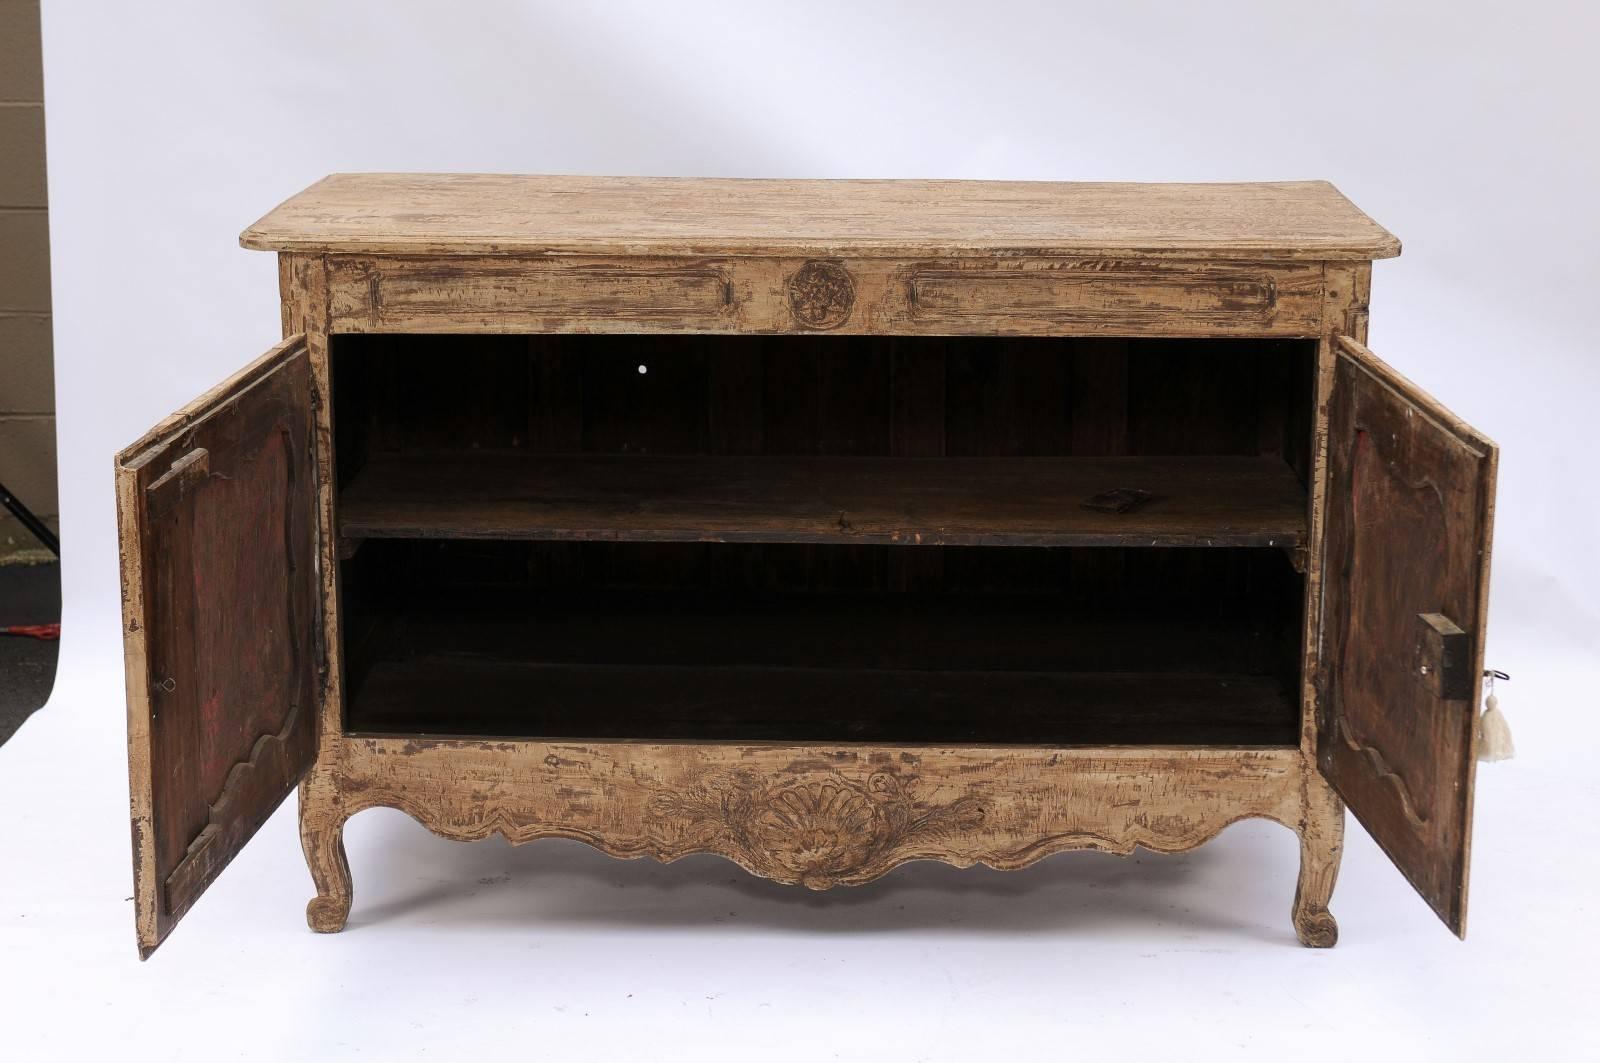 1780s Stripped Wood Two-Door Buffet from the Auvergne Region of France 2